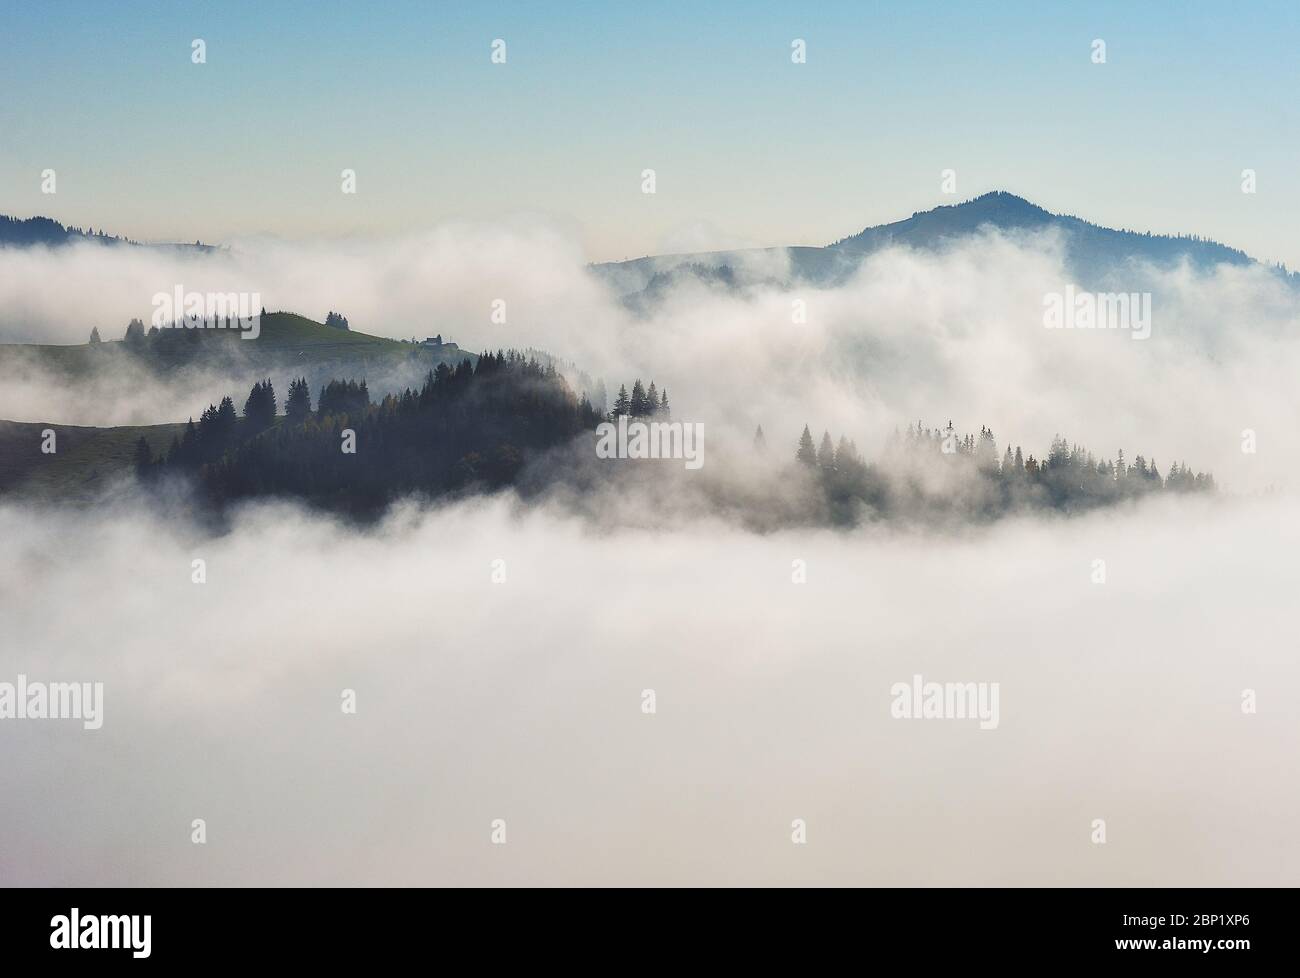 Predawn time in the highlands. mountain silhouettes in the fog Stock Photo